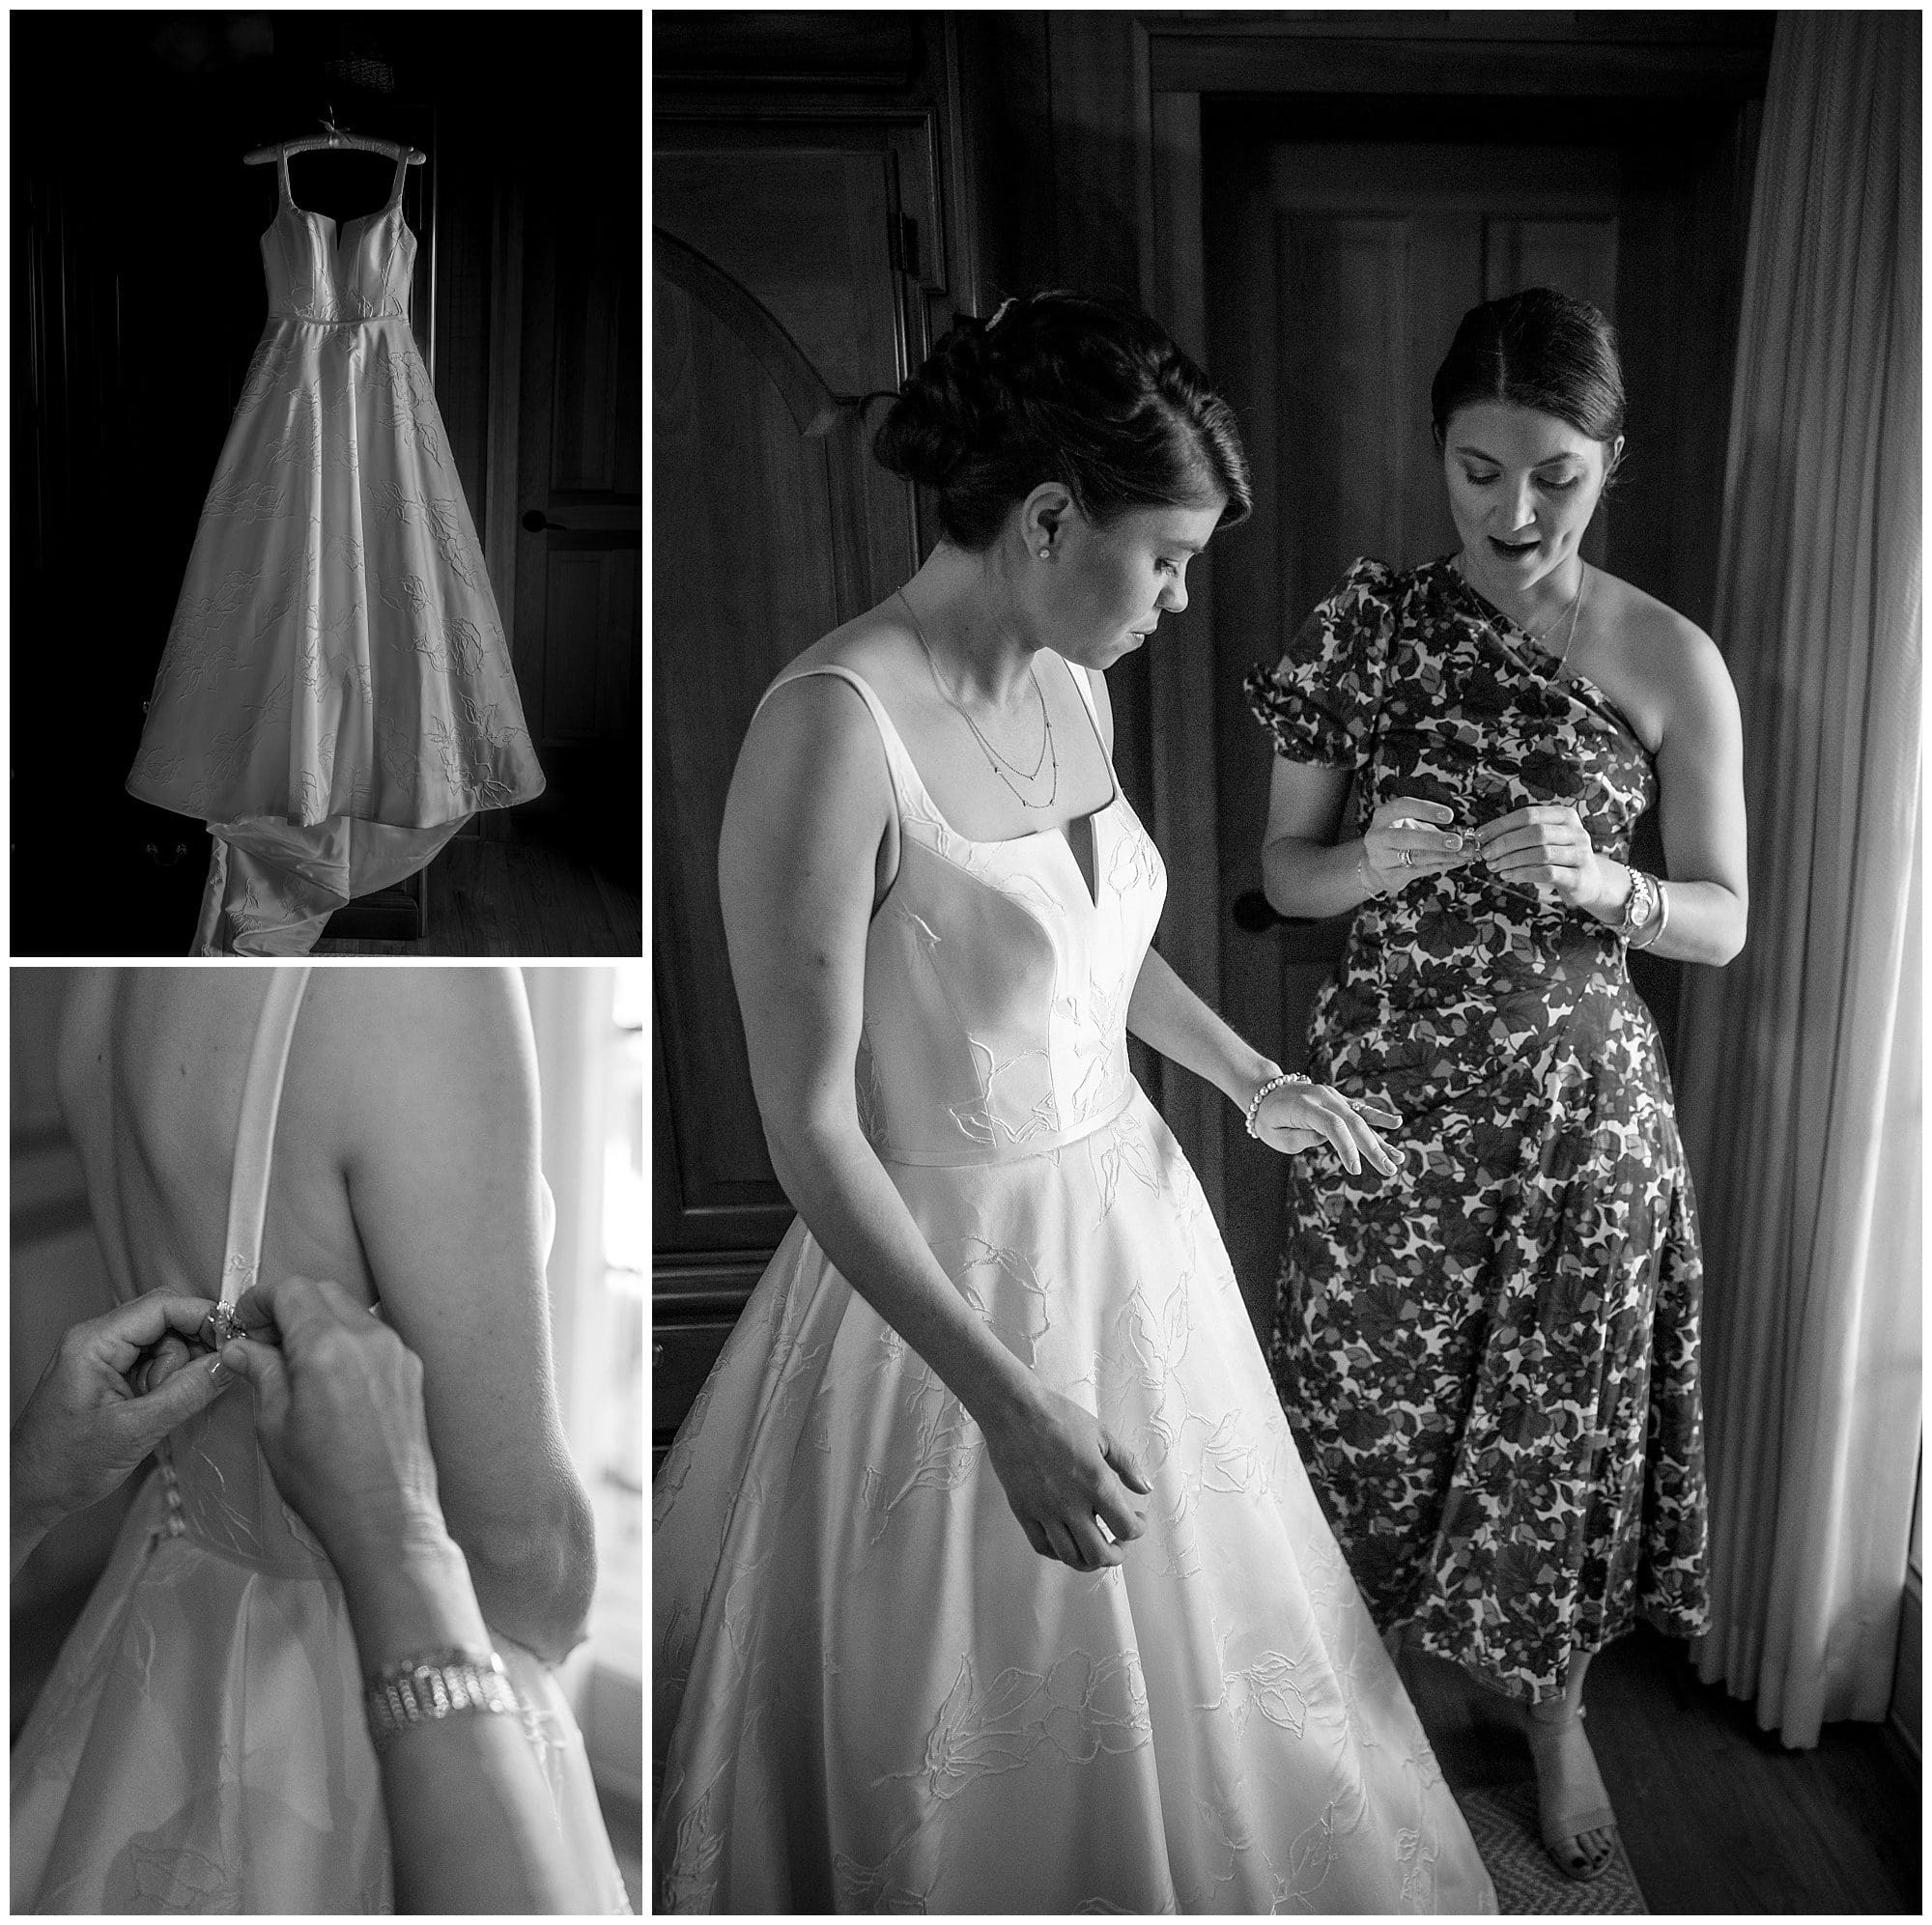 A bride is getting ready for her wedding dress.